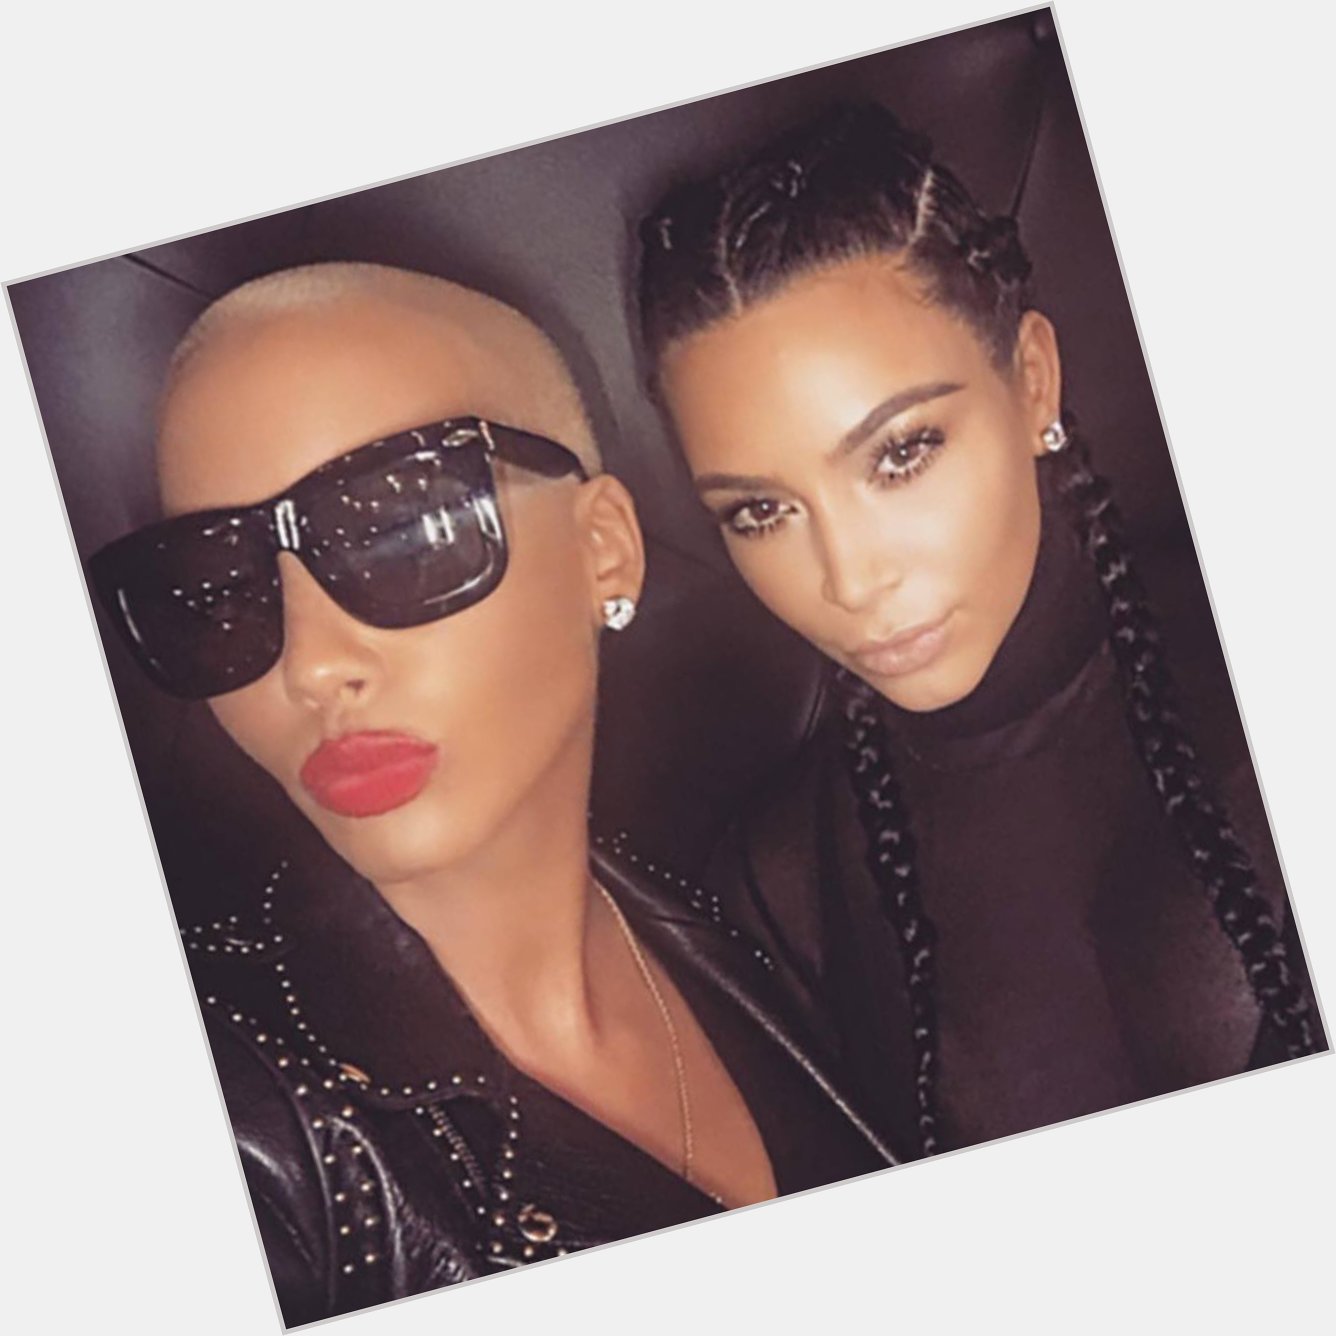 Happy Kim K./Amber Rose Mutual Birthday Day to all who celebrate.

(Me. I celebrate. It s a good birthday to have.) 